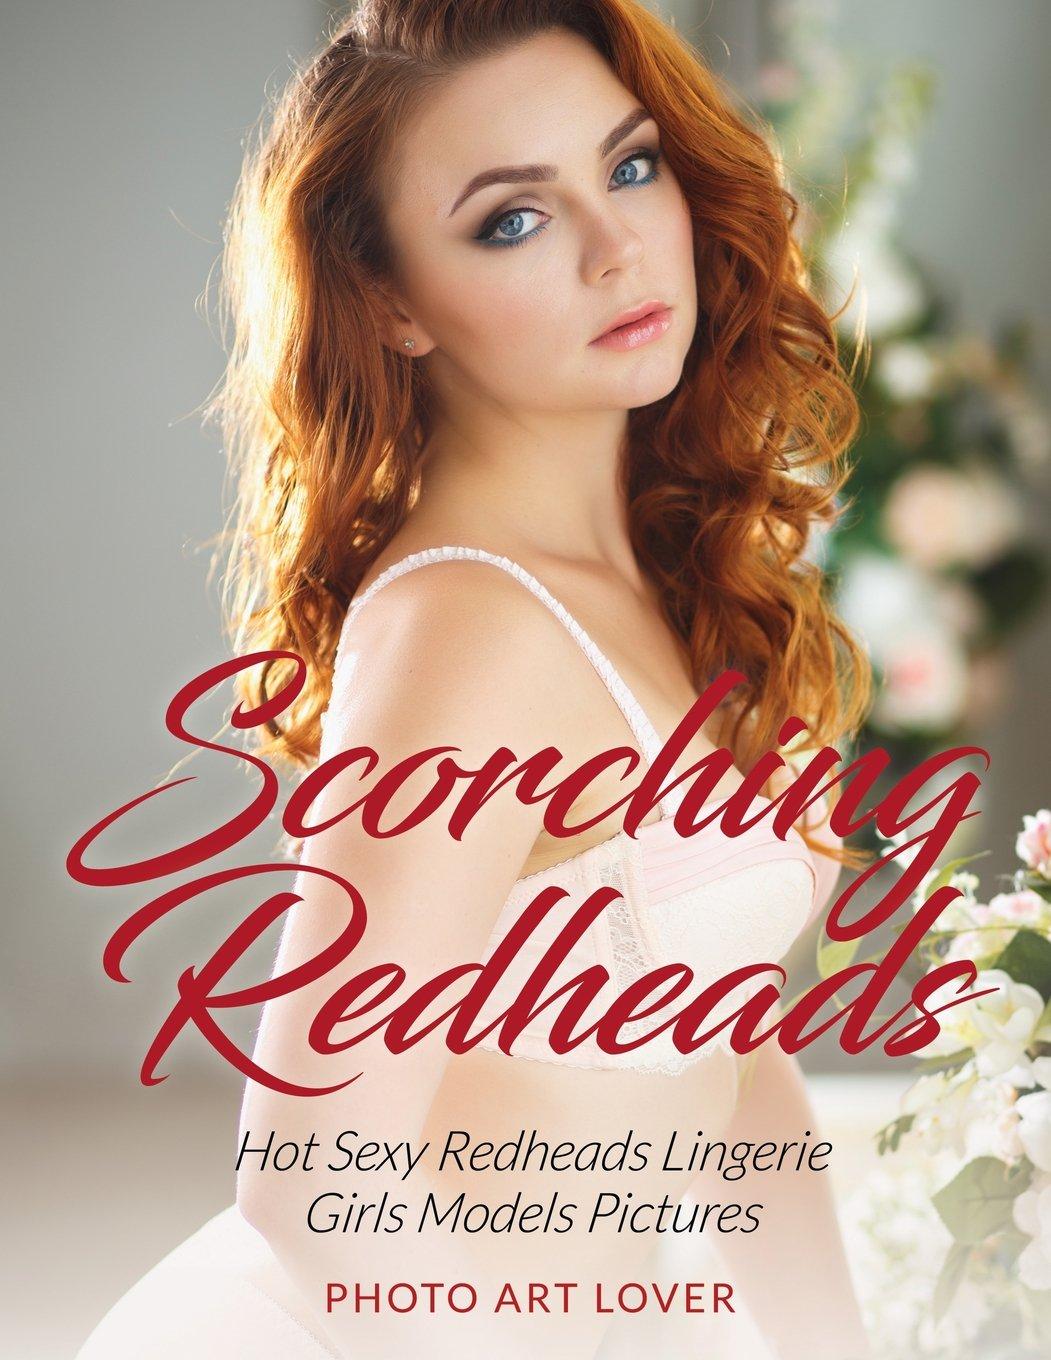 Sherry reccomend Redhead hot and sexy